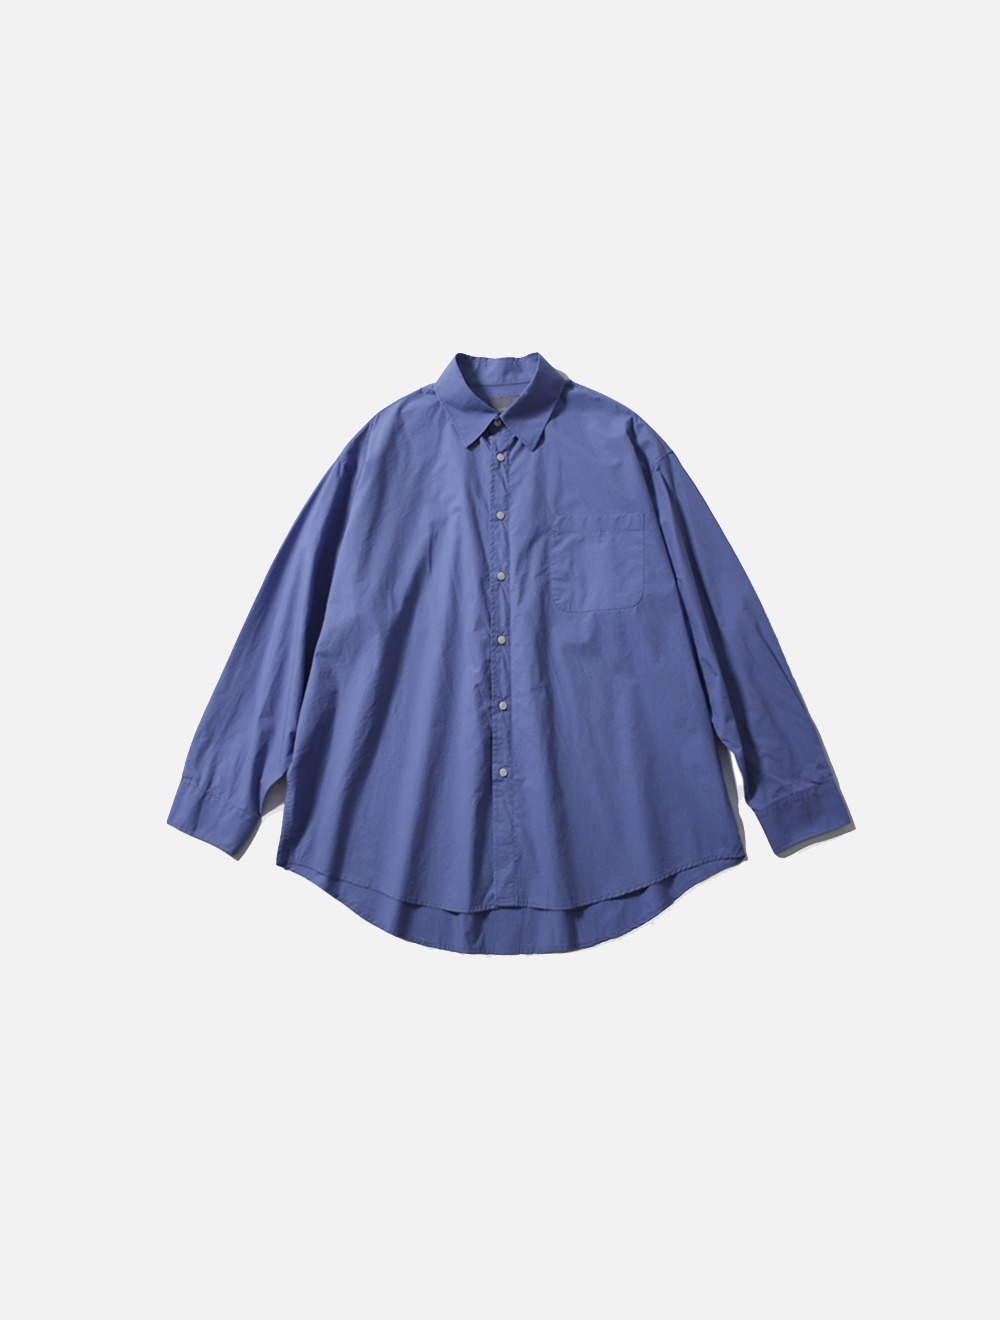 ALL WEATHER OVER SILHOUETTE SHIRT (DAWN BLUE)